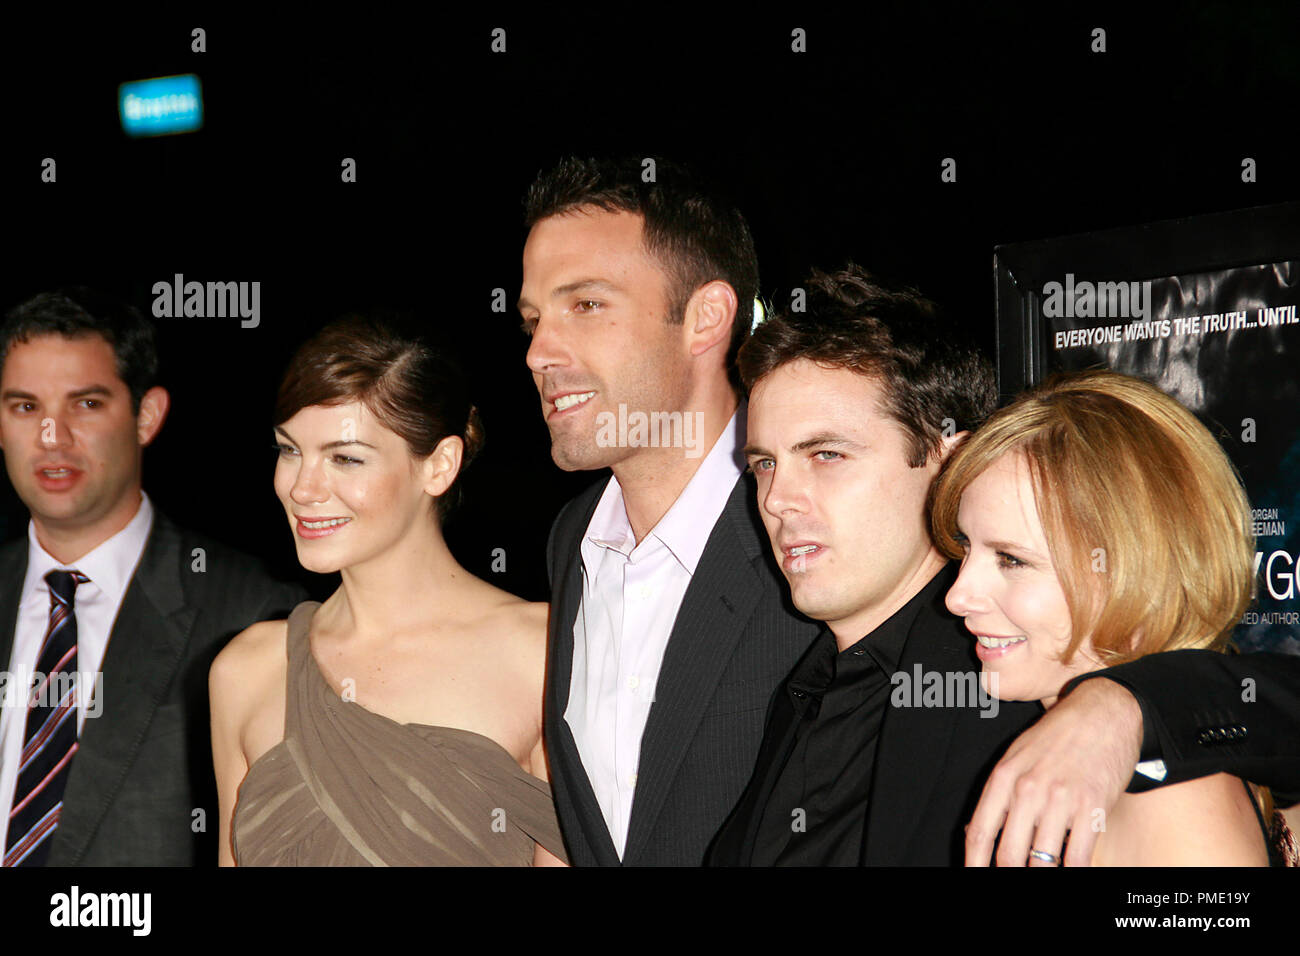 'Gone, Baby, Gone' (Premiere) Michelle Monaghan, Ben Affleck, Casey Affleck, Amy Ryan  10-8-2007 / Bruin Theatre / Westwood, CA / Miramax Films / Photo by Joseph Martinez File Reference # 23204 0058PLX   For Editorial Use Only -  All Rights Reserved Stock Photo